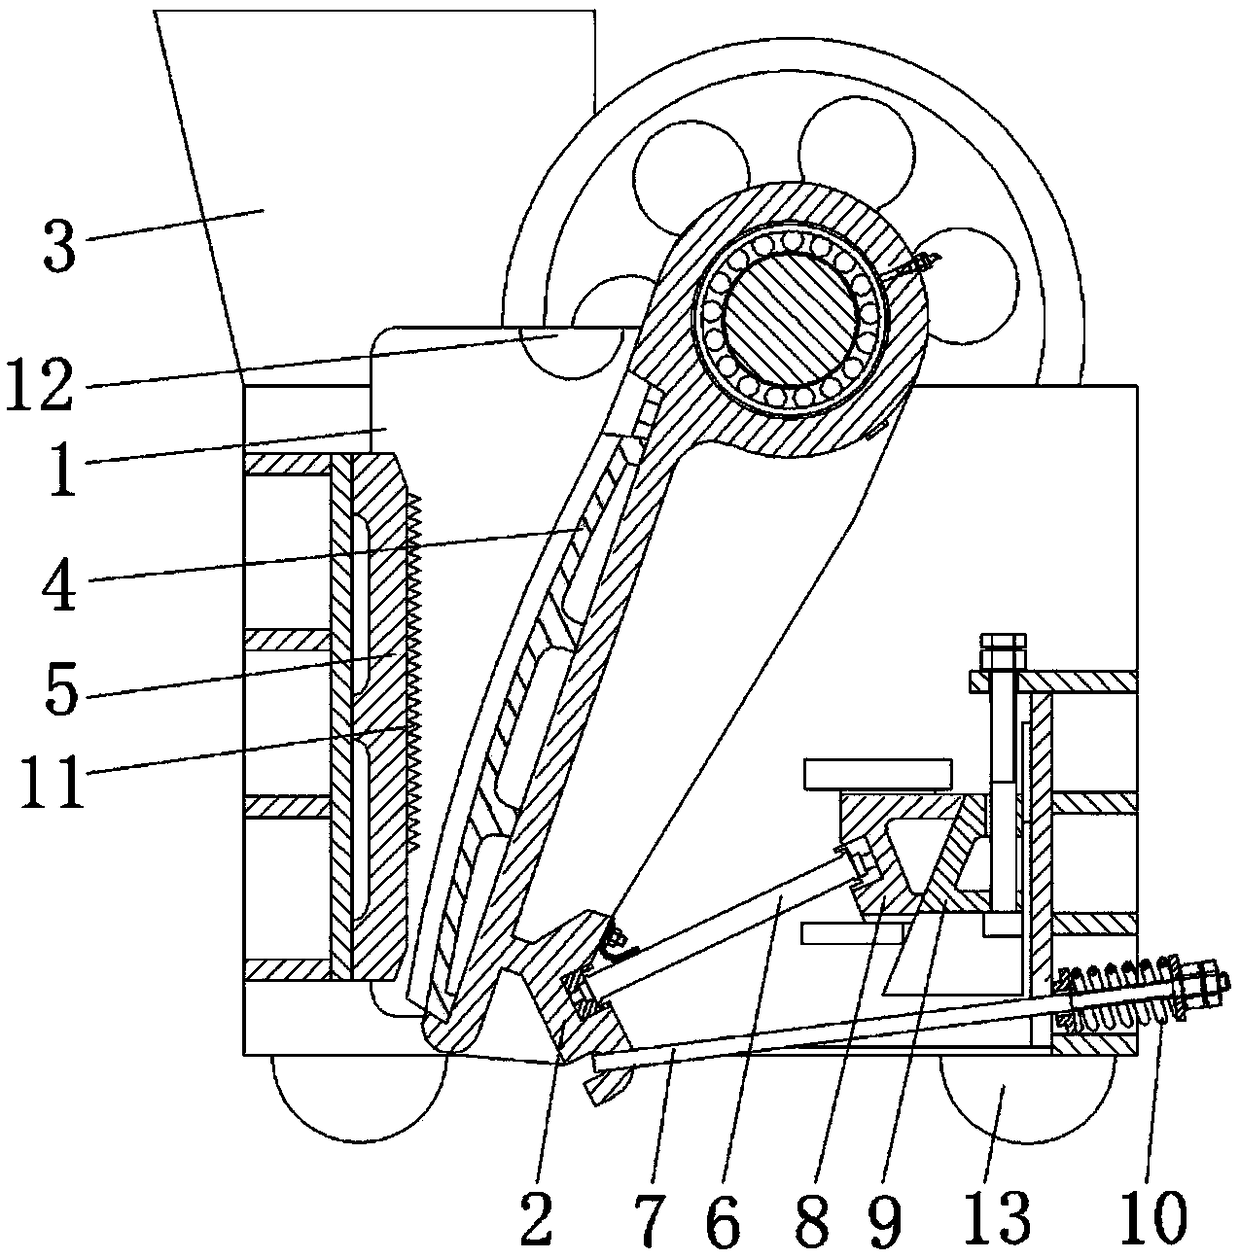 Jaw crushing device with pulleys